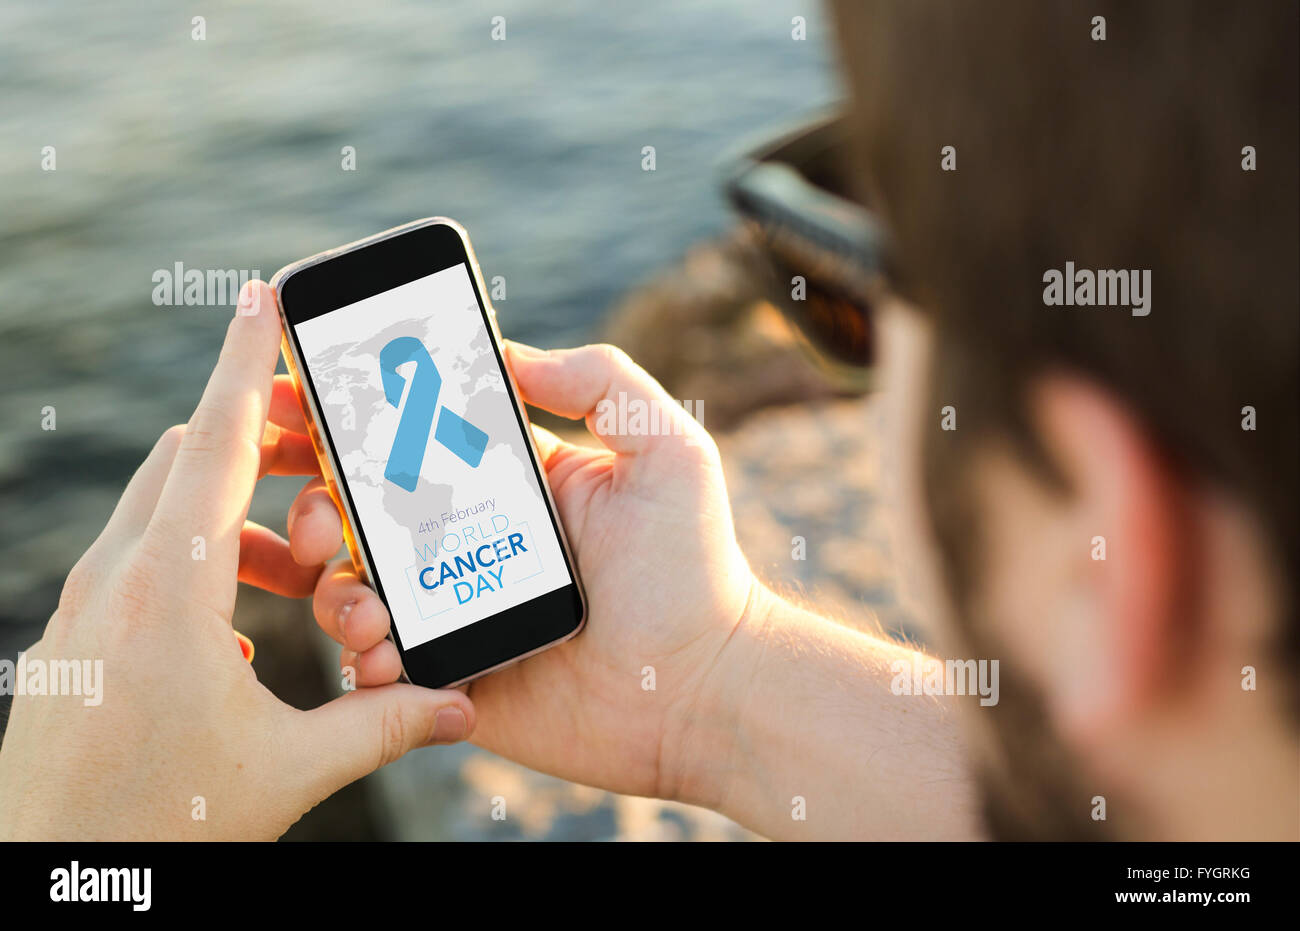 man on the coast using his smartphone to look a World Cancer Day graphic. All screen graphics are made up. Stock Photo